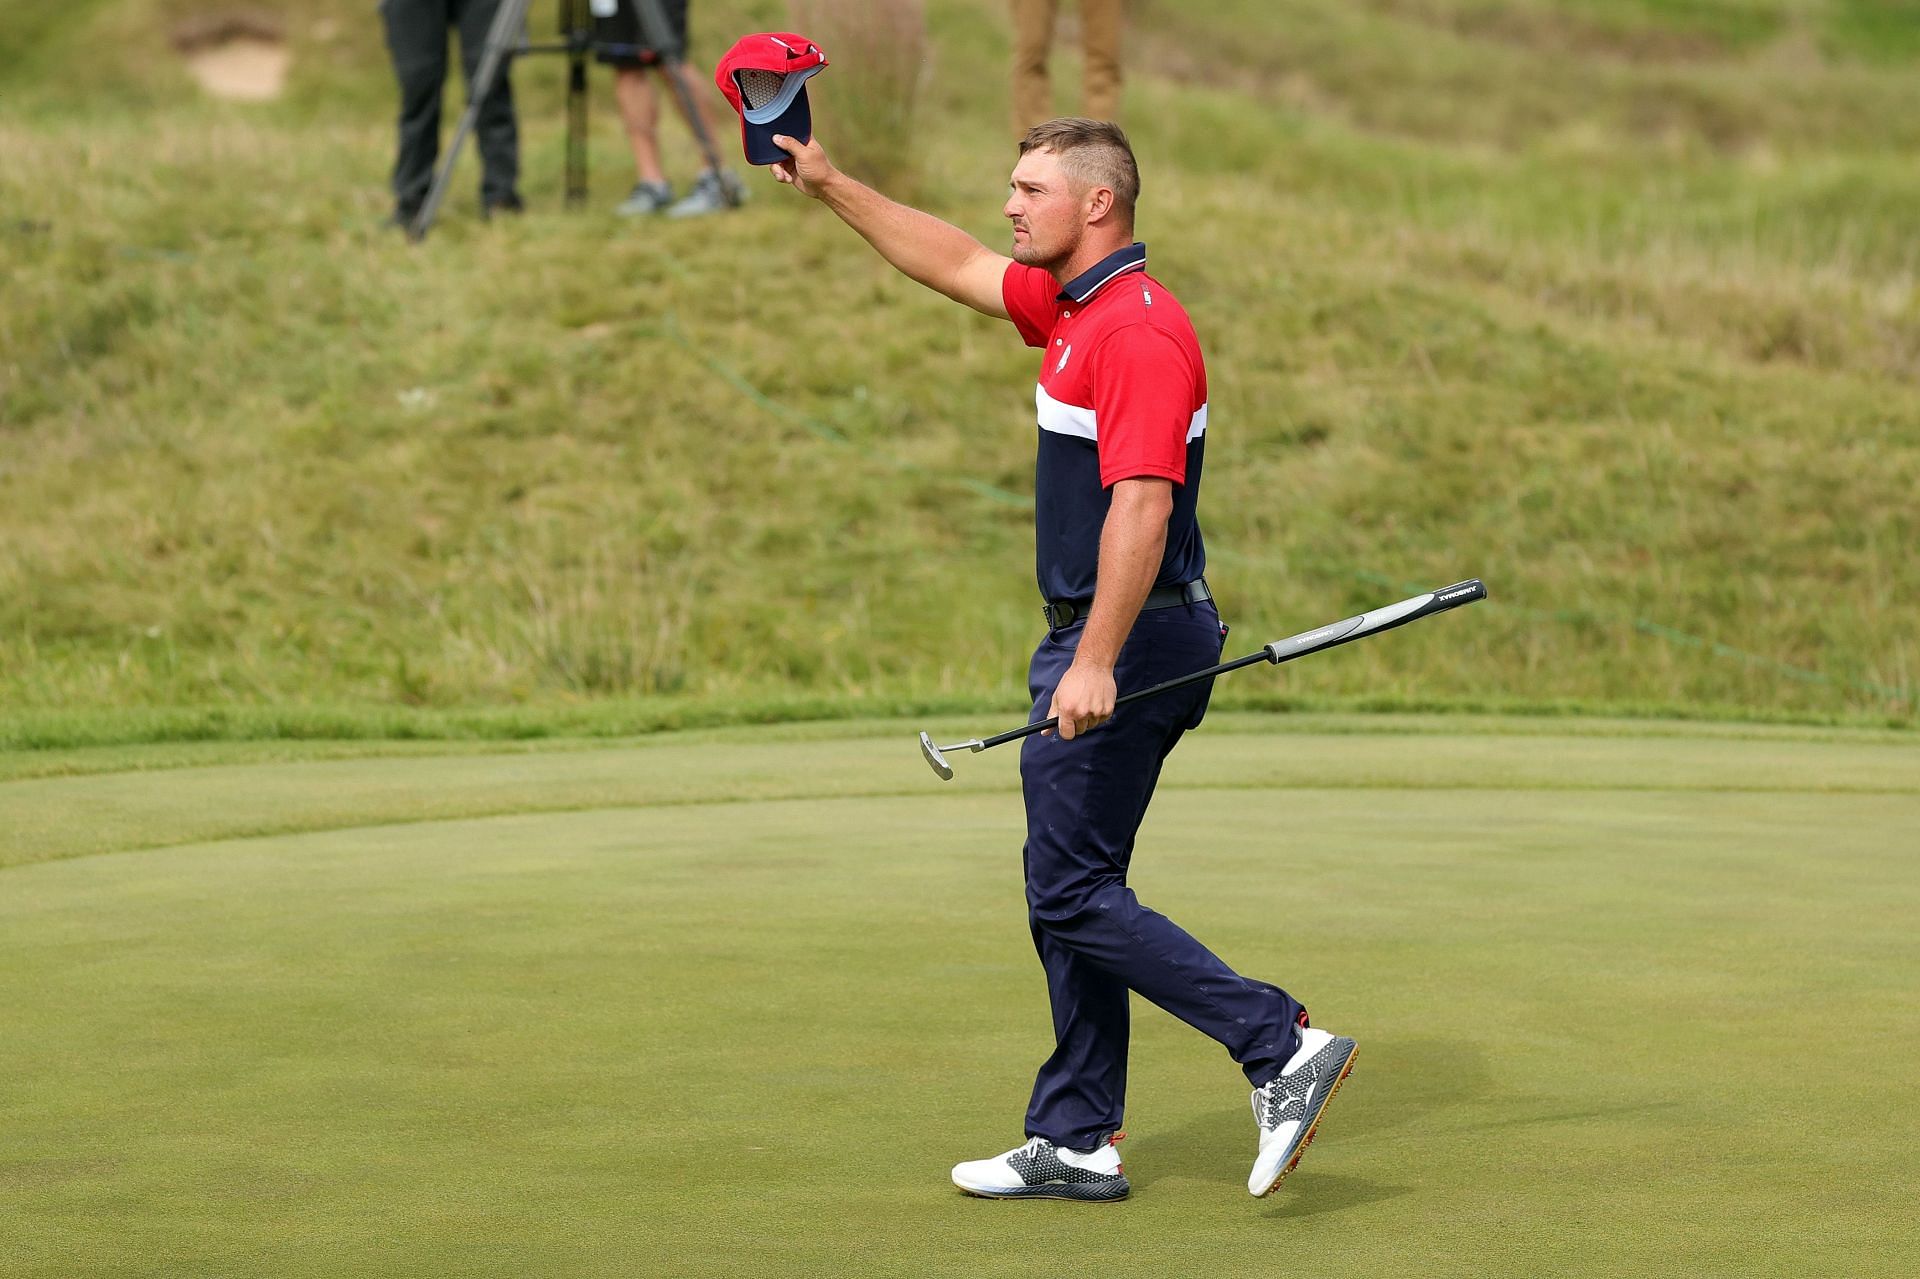 Bryson DeChambeau reacts after making a putt during the 43rd Ryder Cup